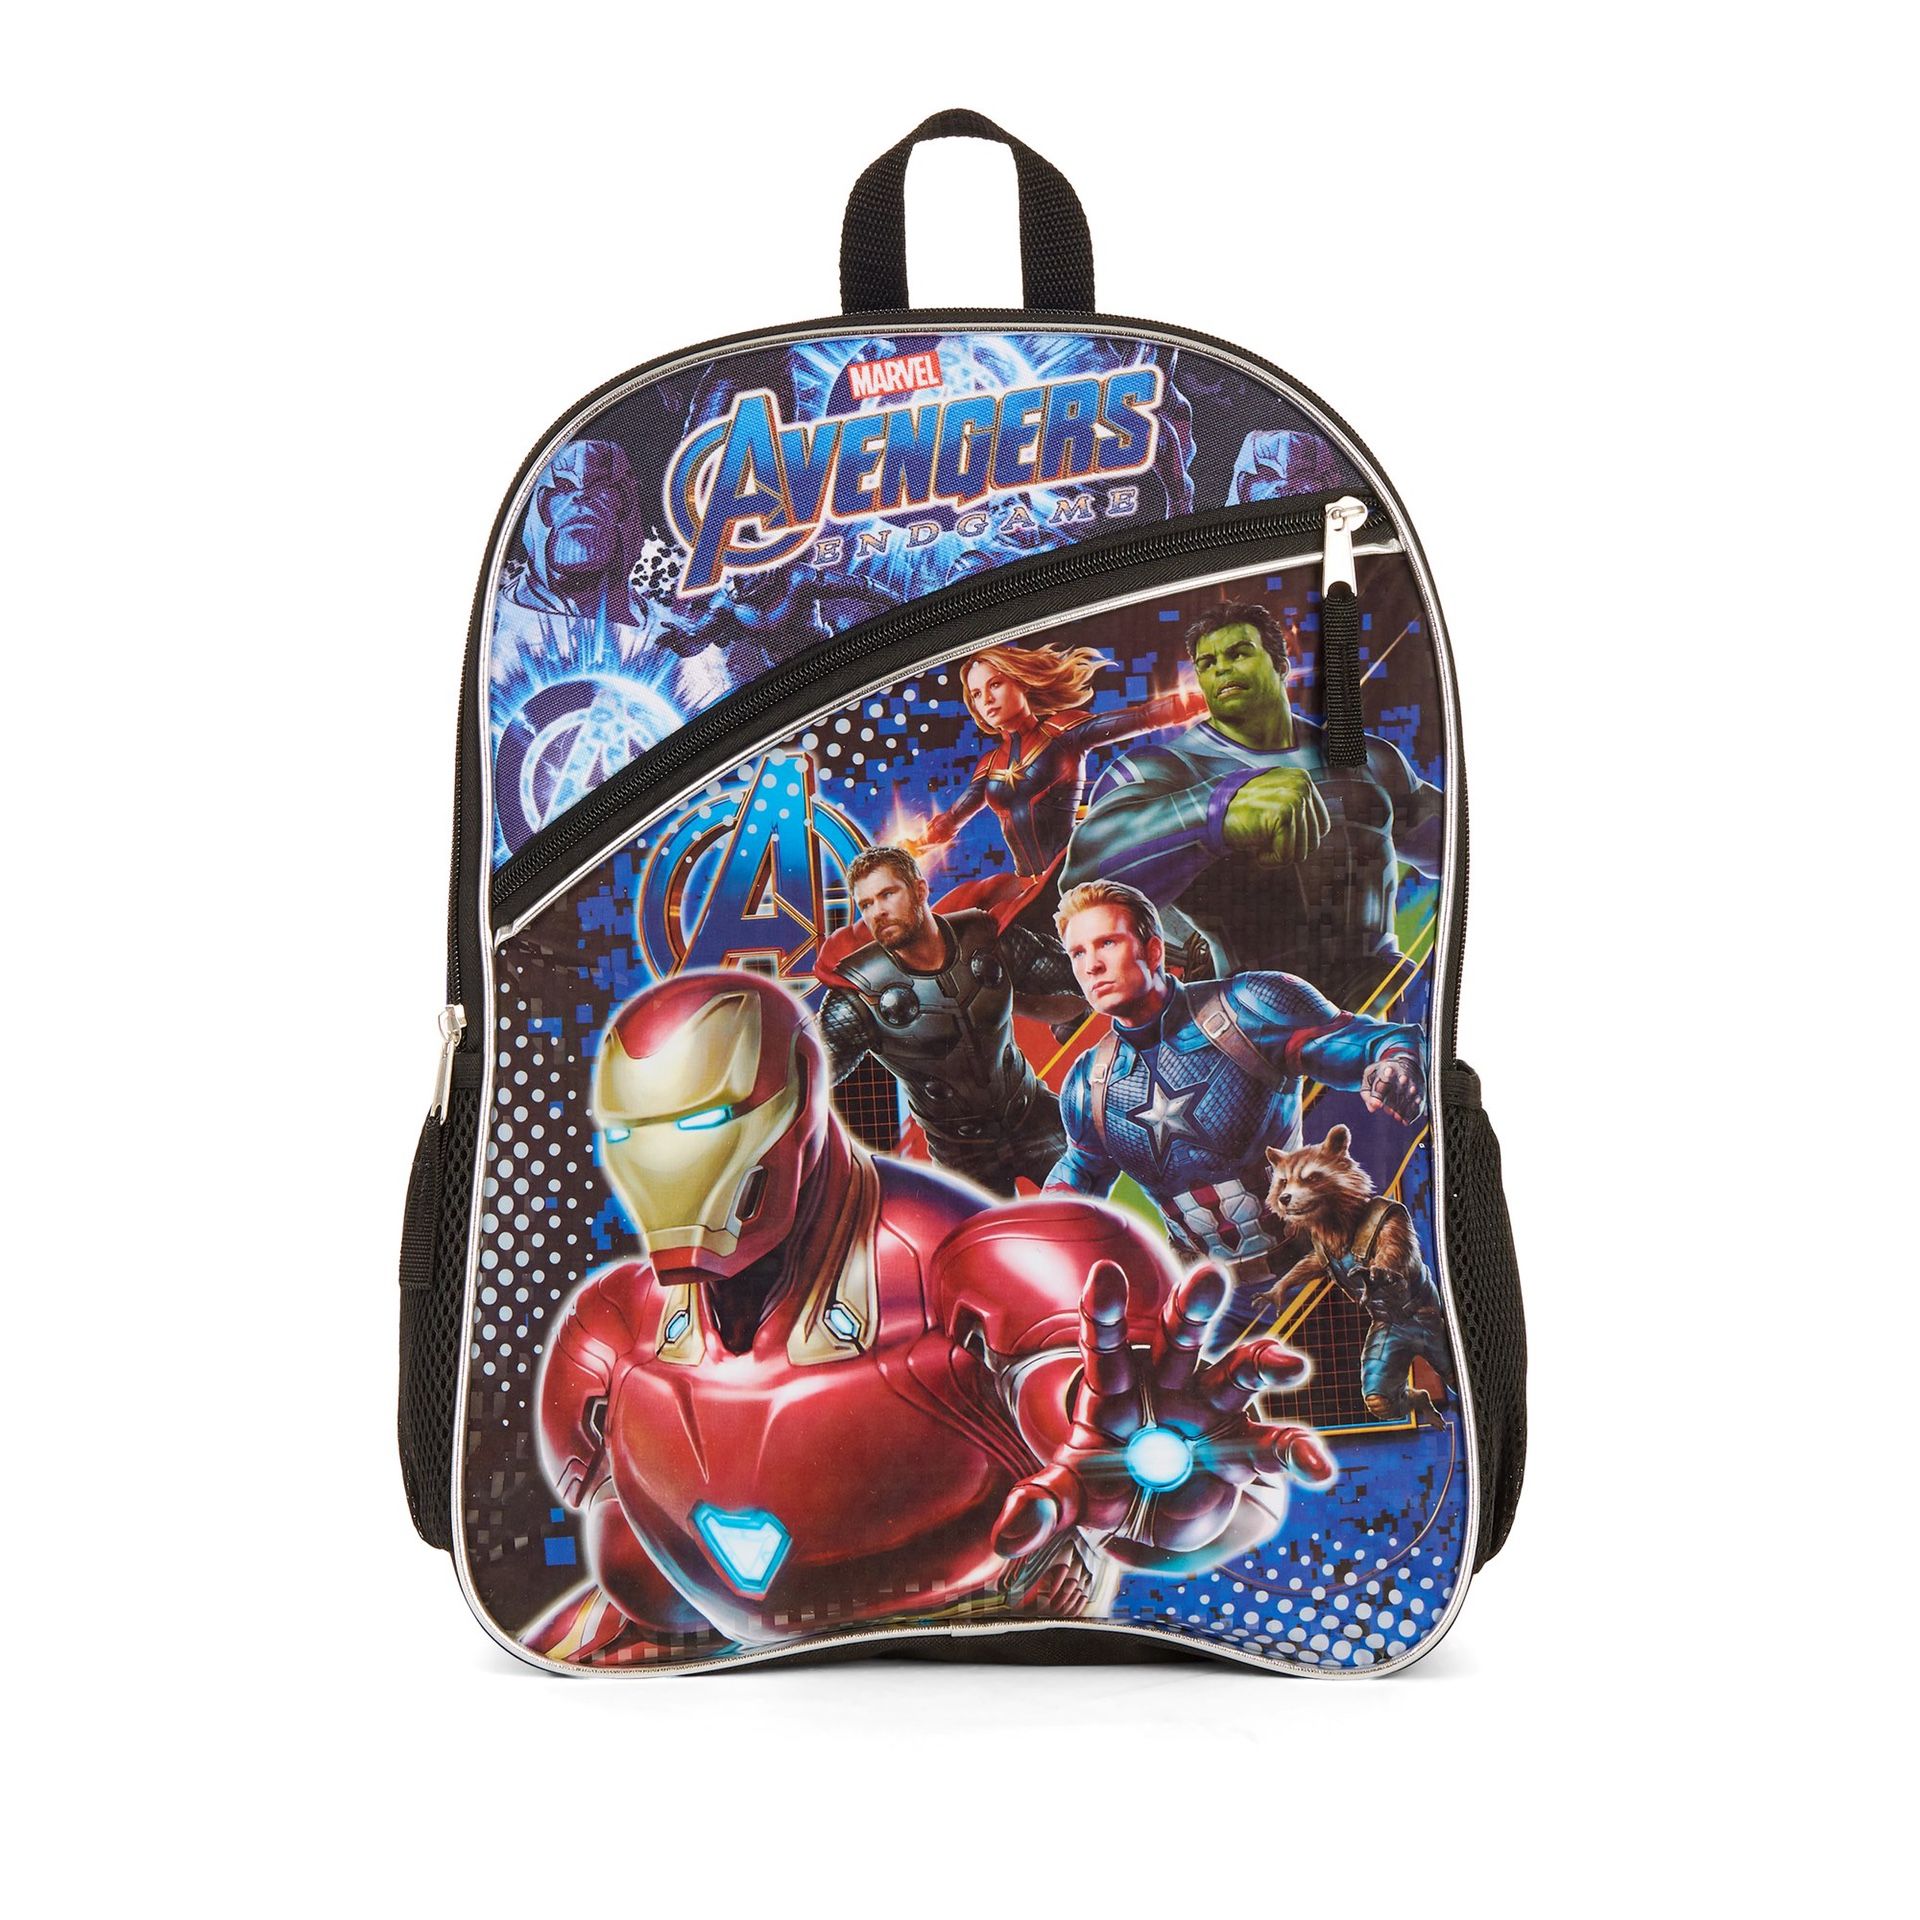 Marvel Avengers Large Backpack - Great Back To School Virtual Learning Gift, Kids Youth